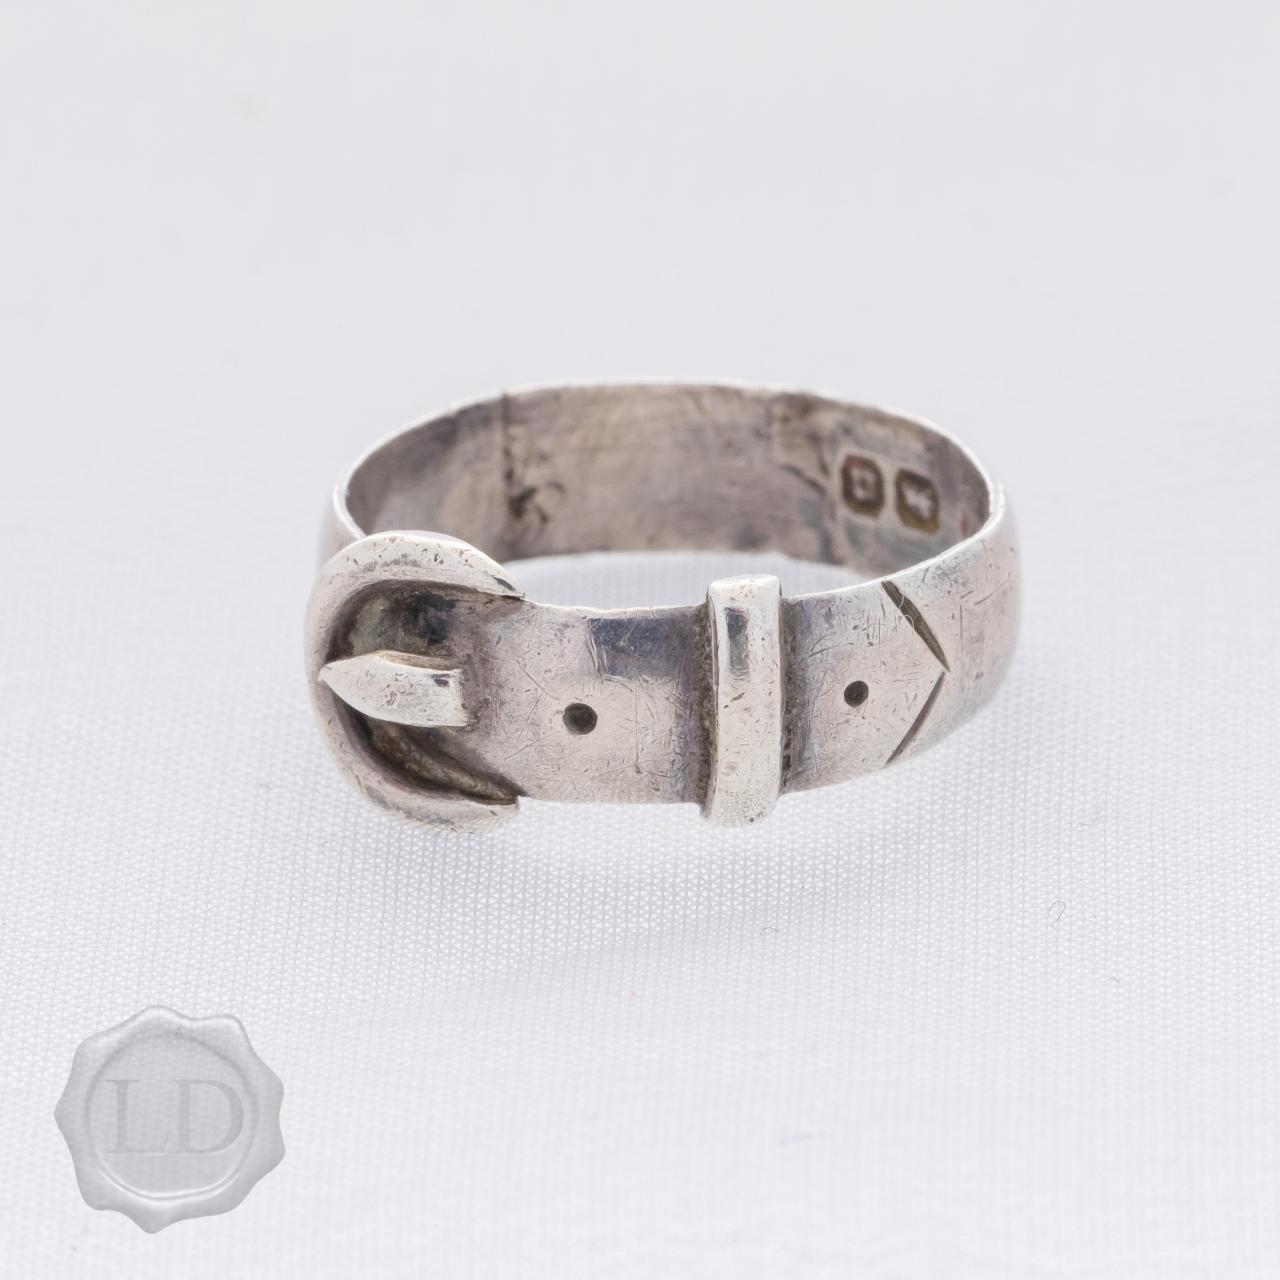 Antique buckle ring